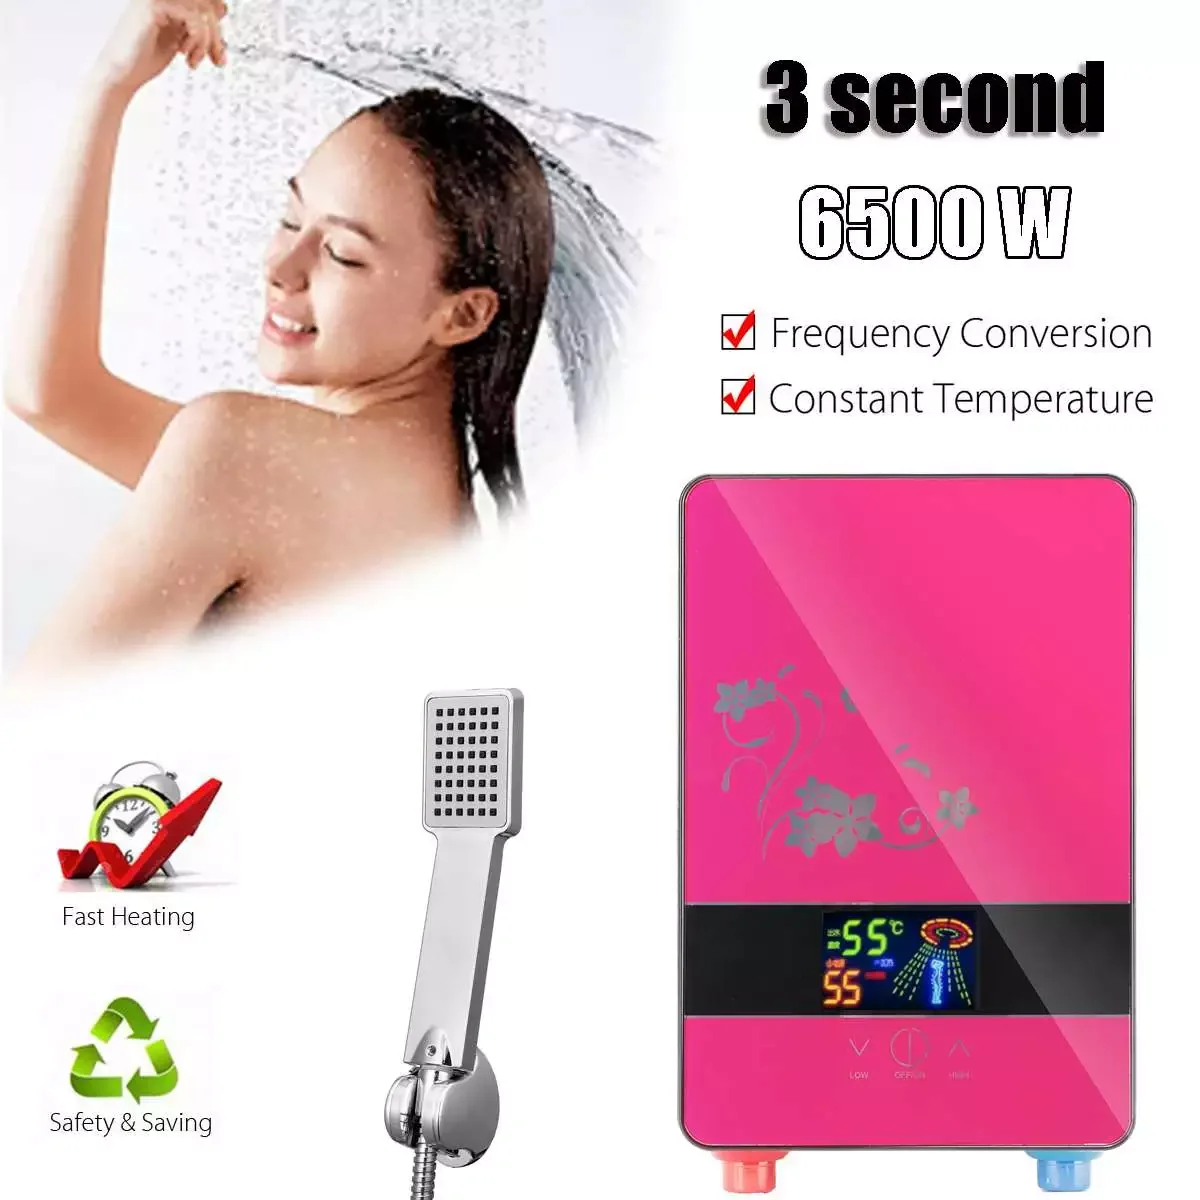 6500W 220V Electric Hot Water Heater Tankless Instant Heating Set Bathroom Self-checking Automatically Safety With Shower Nozzle enlarge